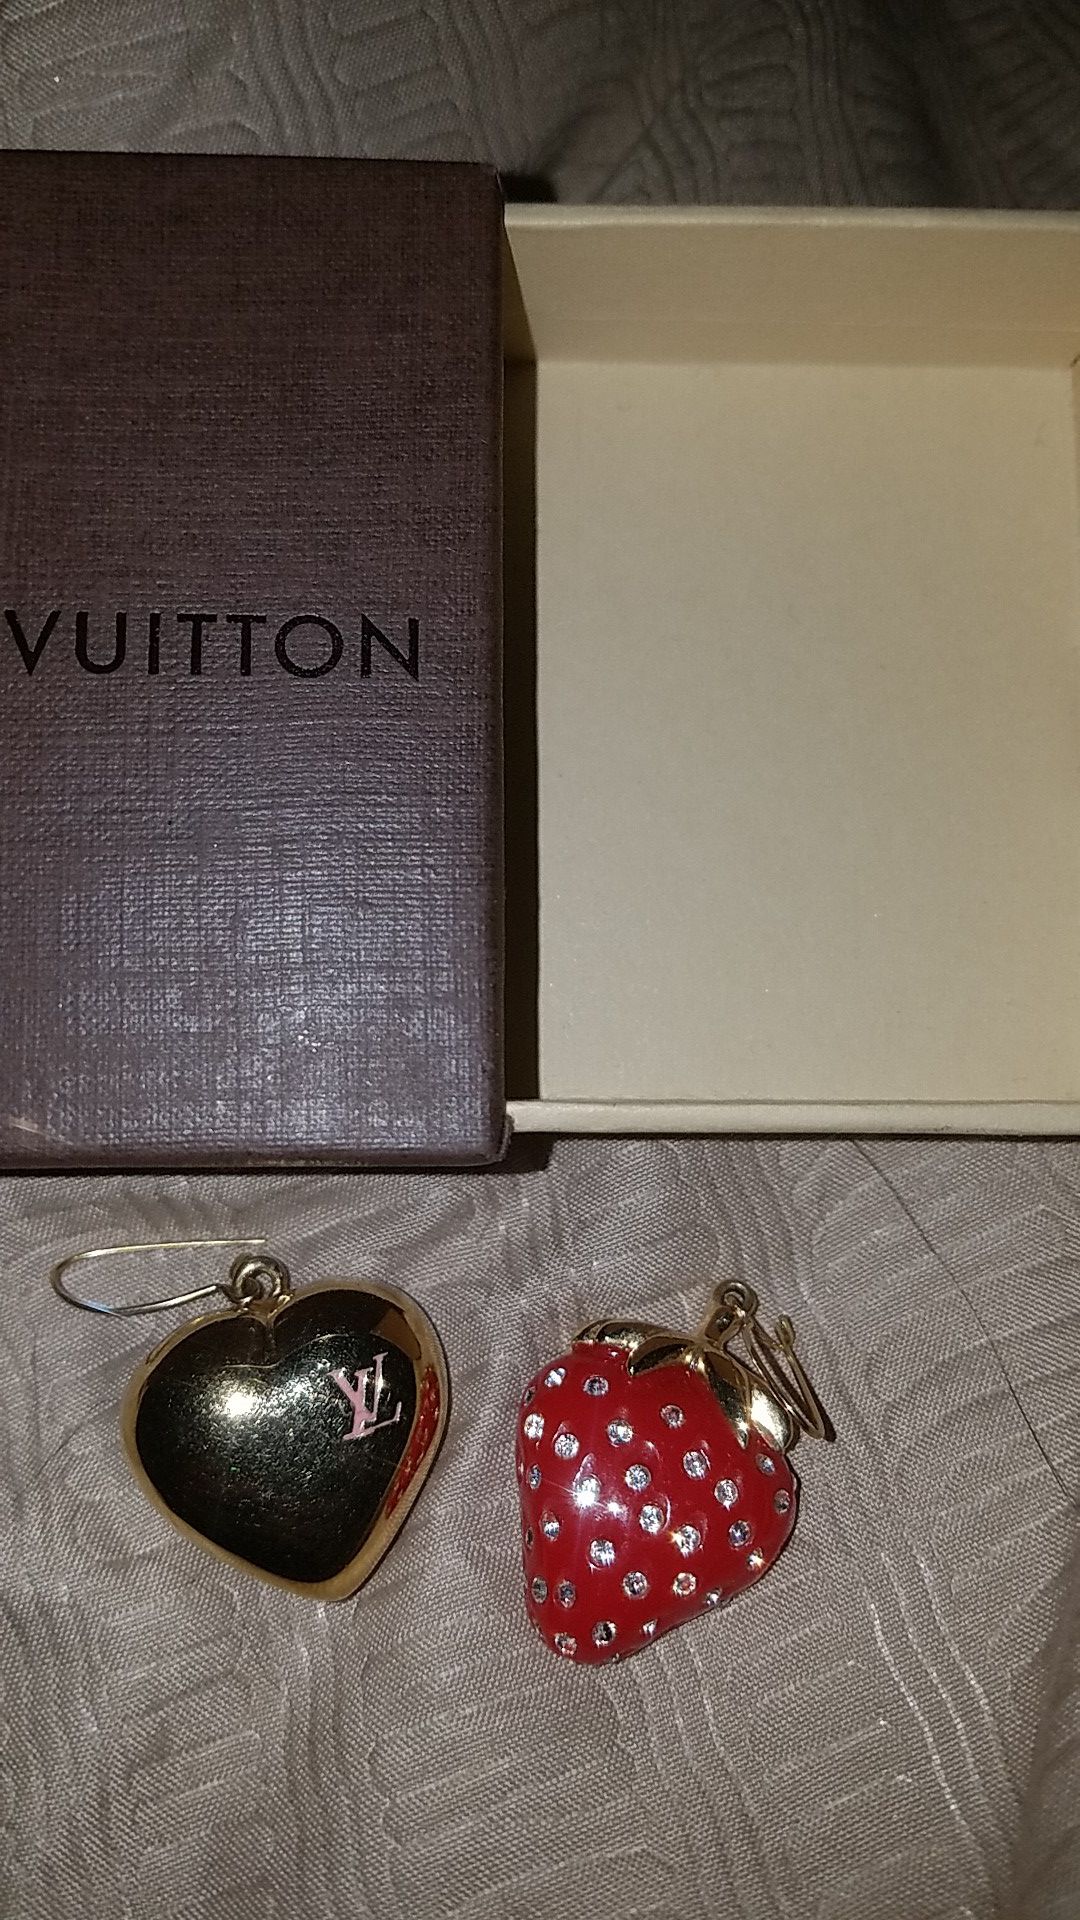 Authentic Louis Vuitton earrings 18K rose gold pink shell earrings LV  classic flower ladies earrings for Sale in Emporia, KS - OfferUp